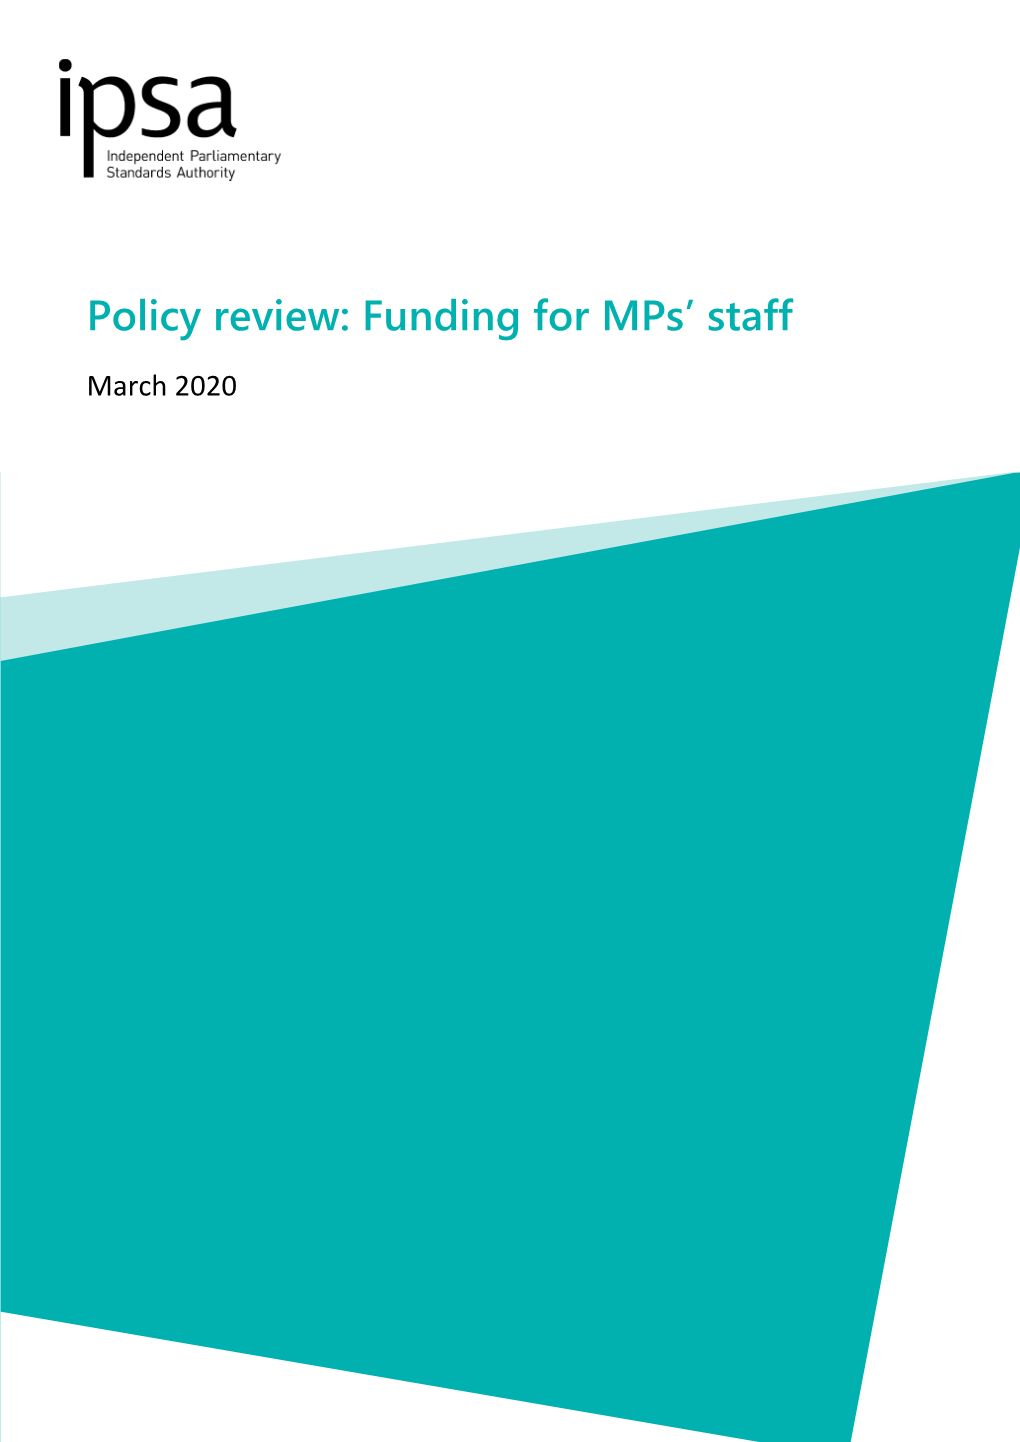 Policy Review: Funding for Mps' Staff